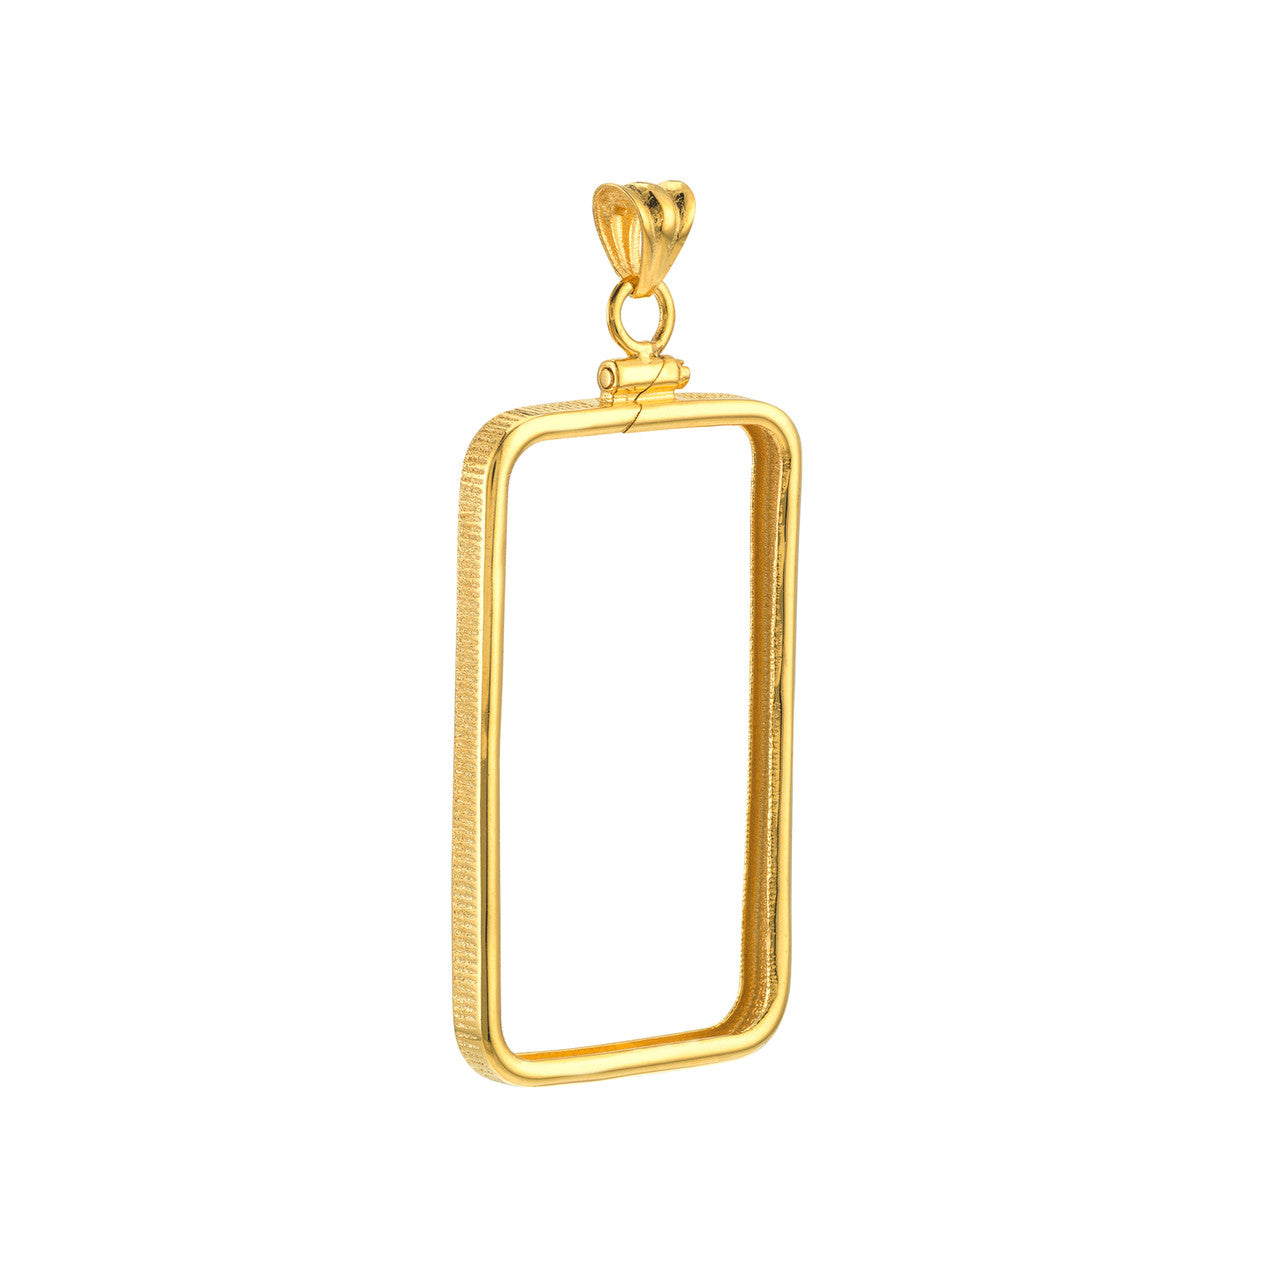 14K Yellow Gold Pamp Suisse Lady Fortuna 1 oz Bar Bezel Screw Top Frame Mounting Holder Pendant Charm